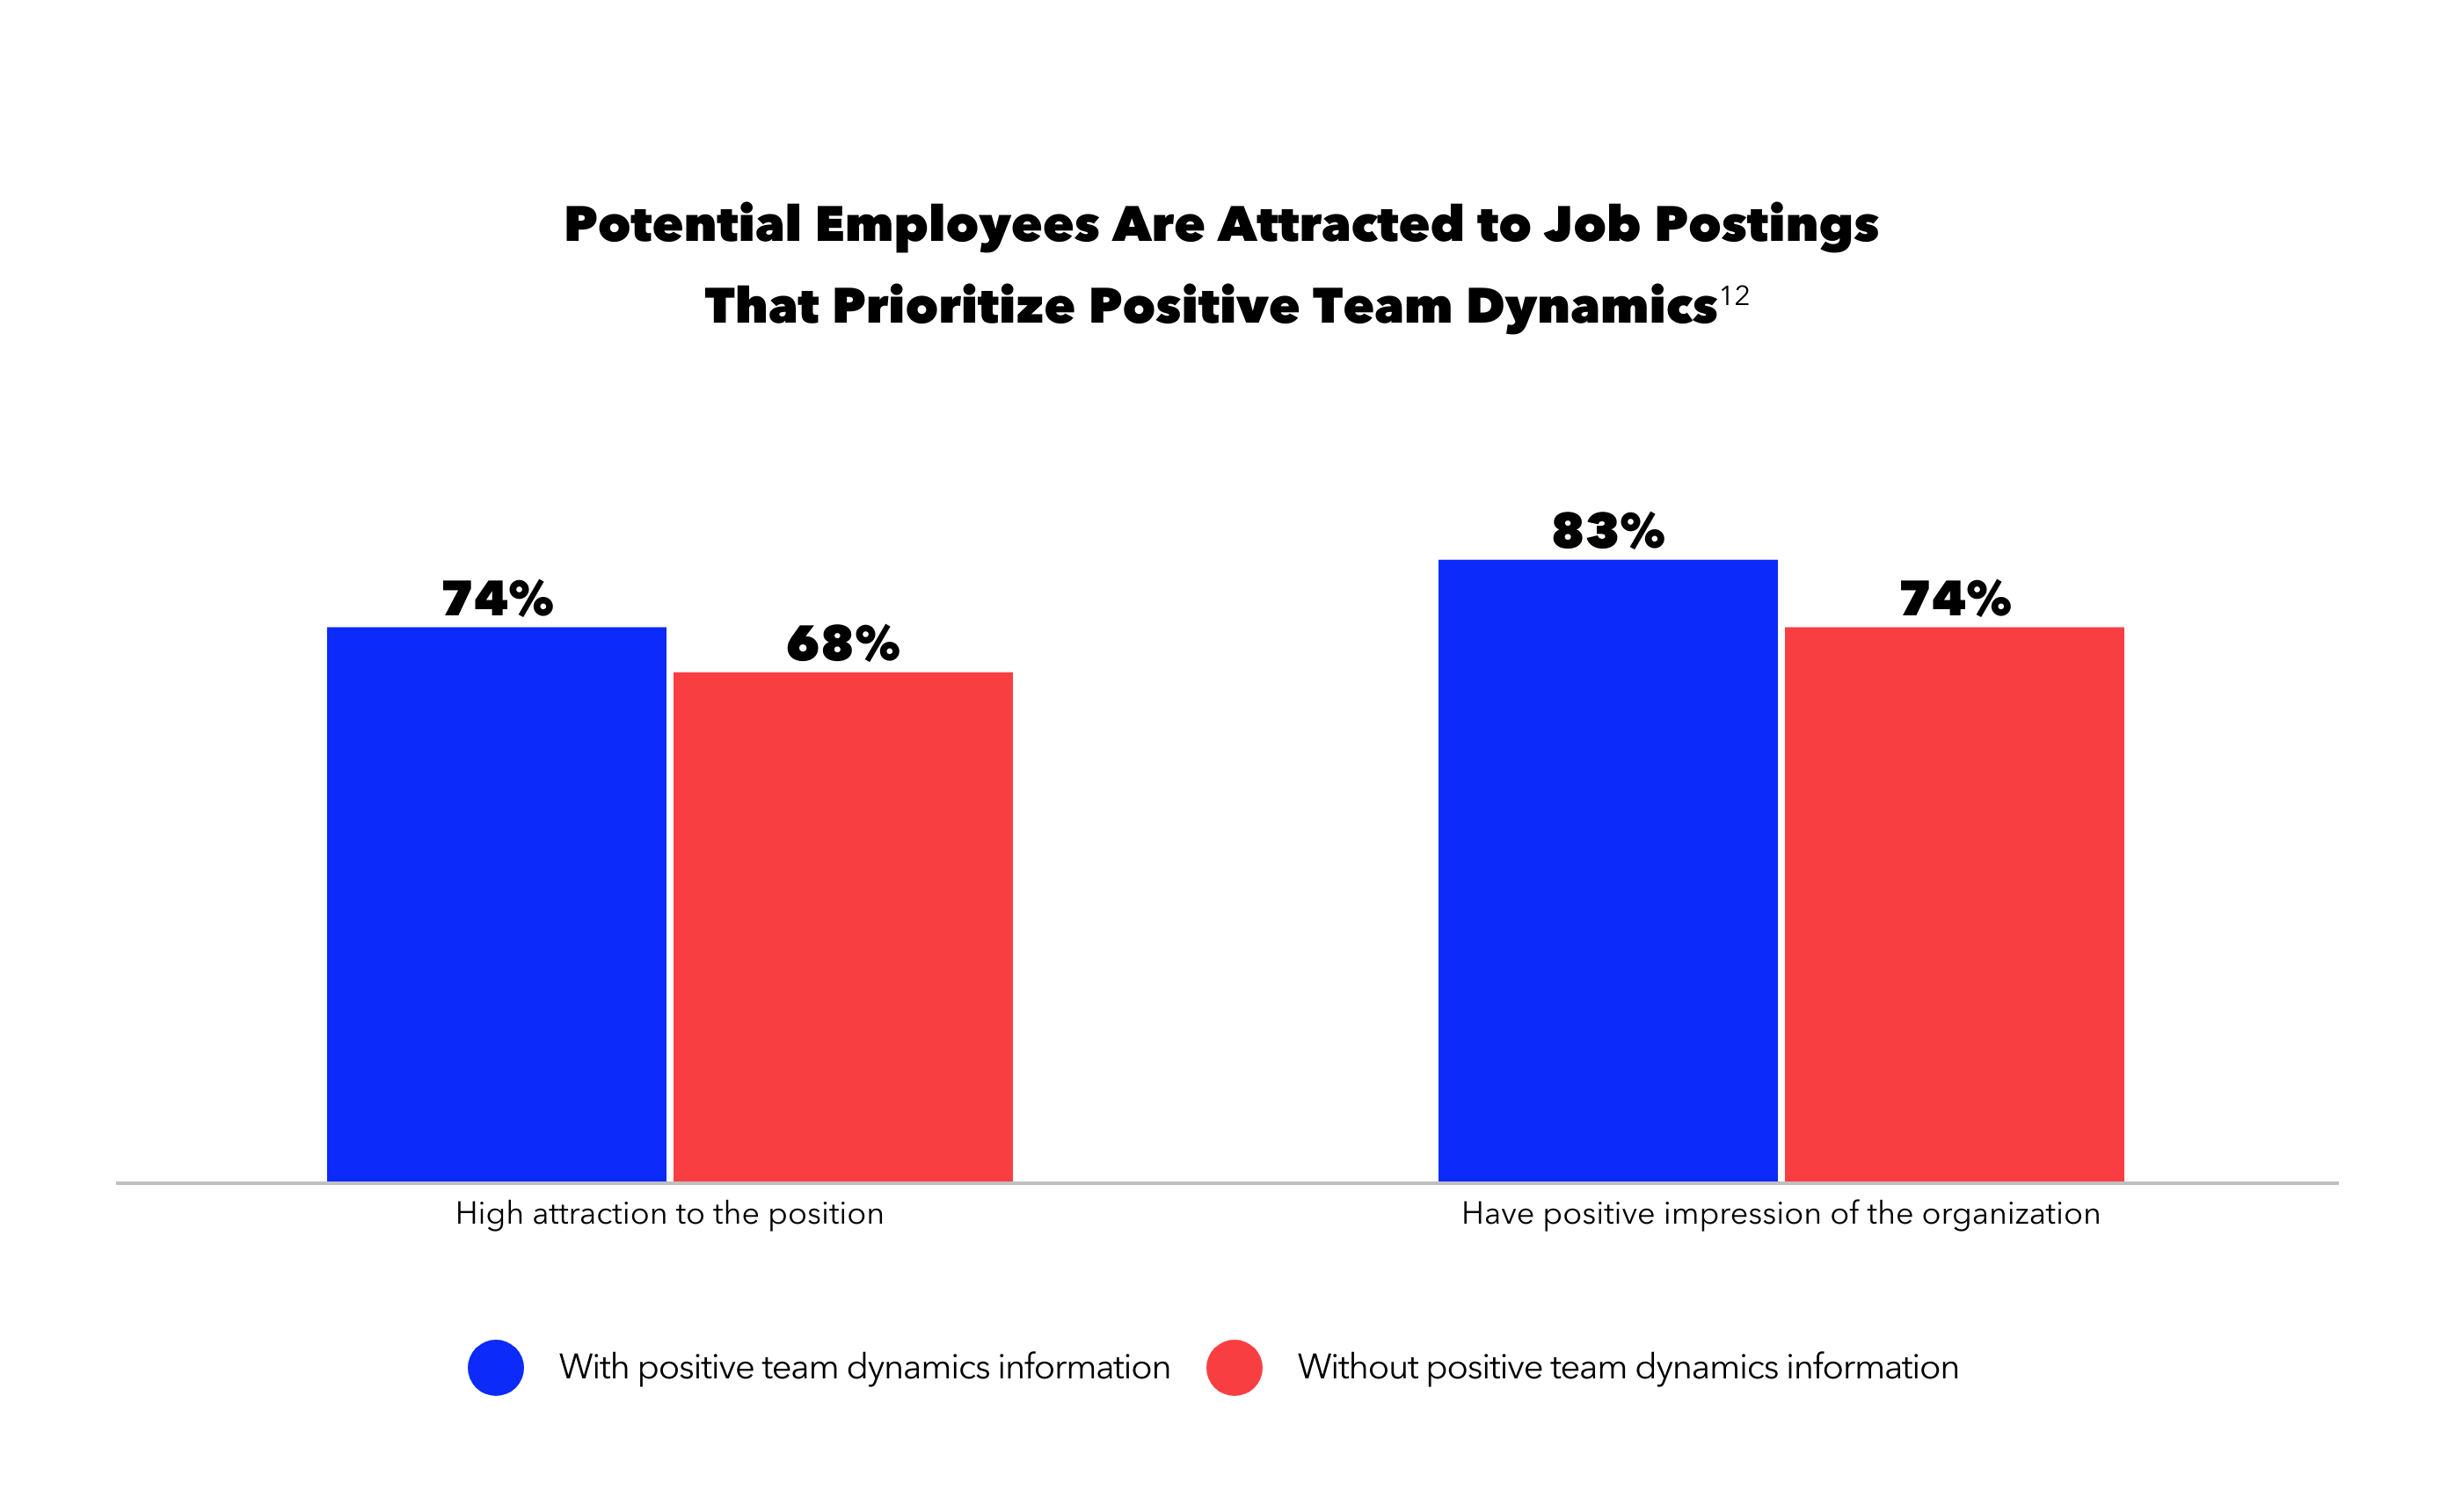 Potential employees are attracted to job postings that prioritize positive team dynamics.